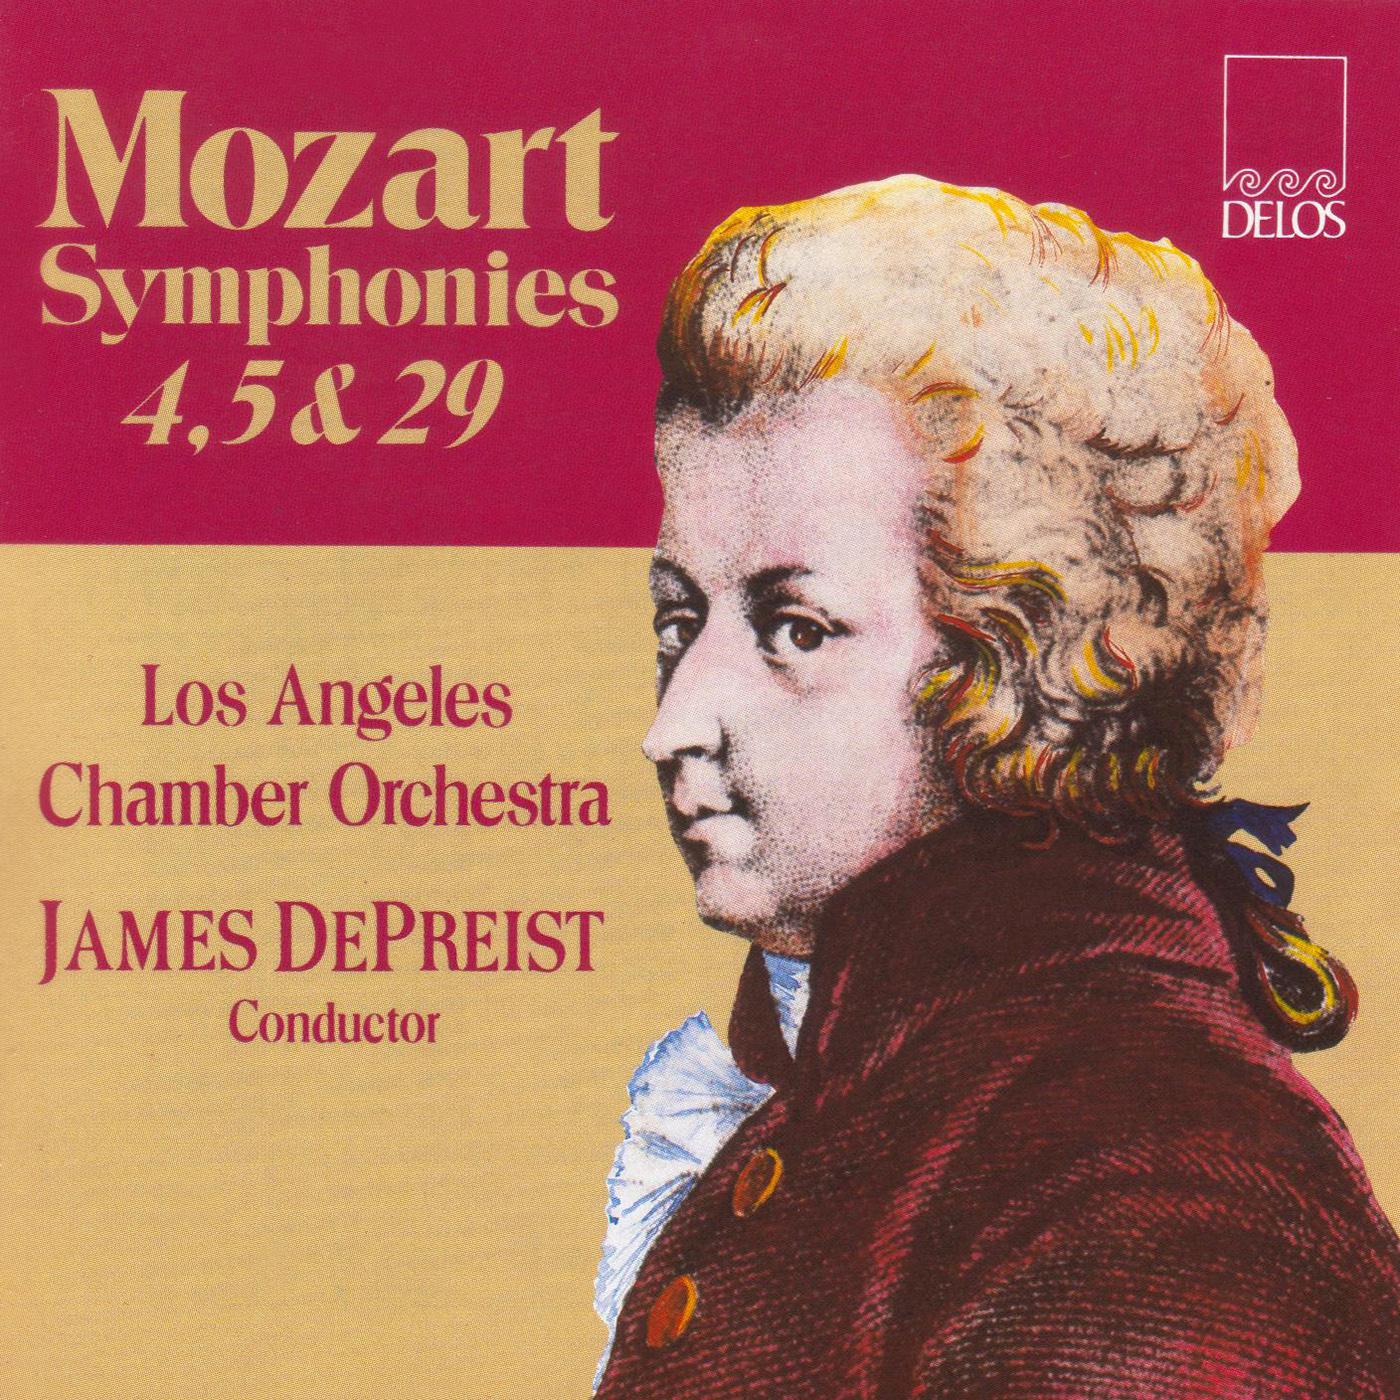 MOZART, W.A.: Symphonies Nos. 4, 5 and 29 (Los Angeles Chamber Orchestra, DePreist)专辑